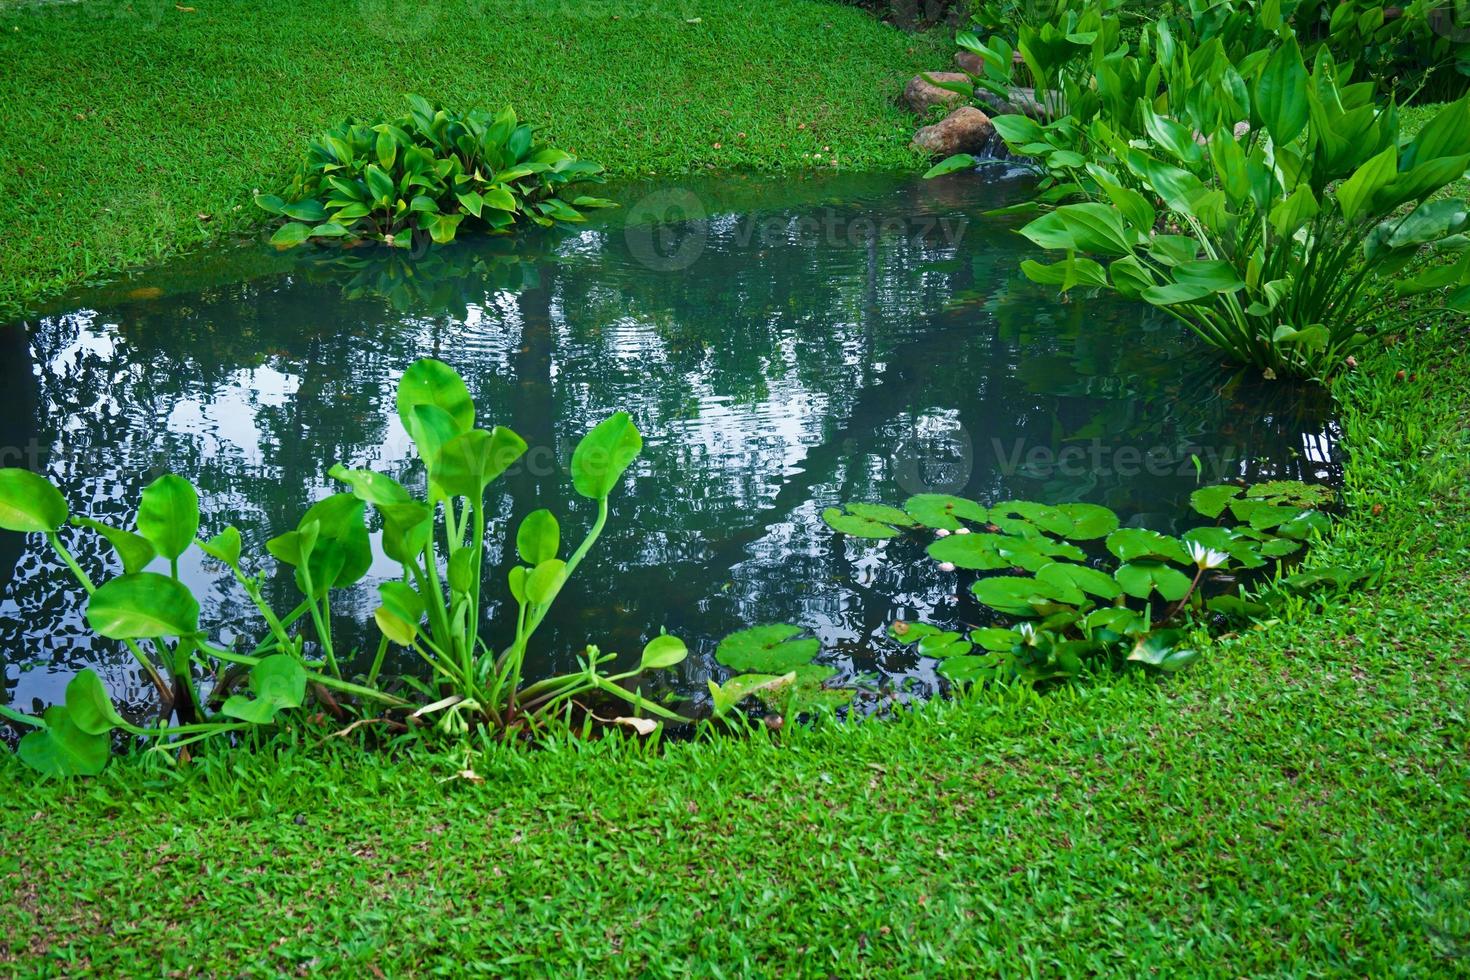 Small pond as part of landscaping with aquatic grass and green plants and water  surrounded by lush vegetation photo